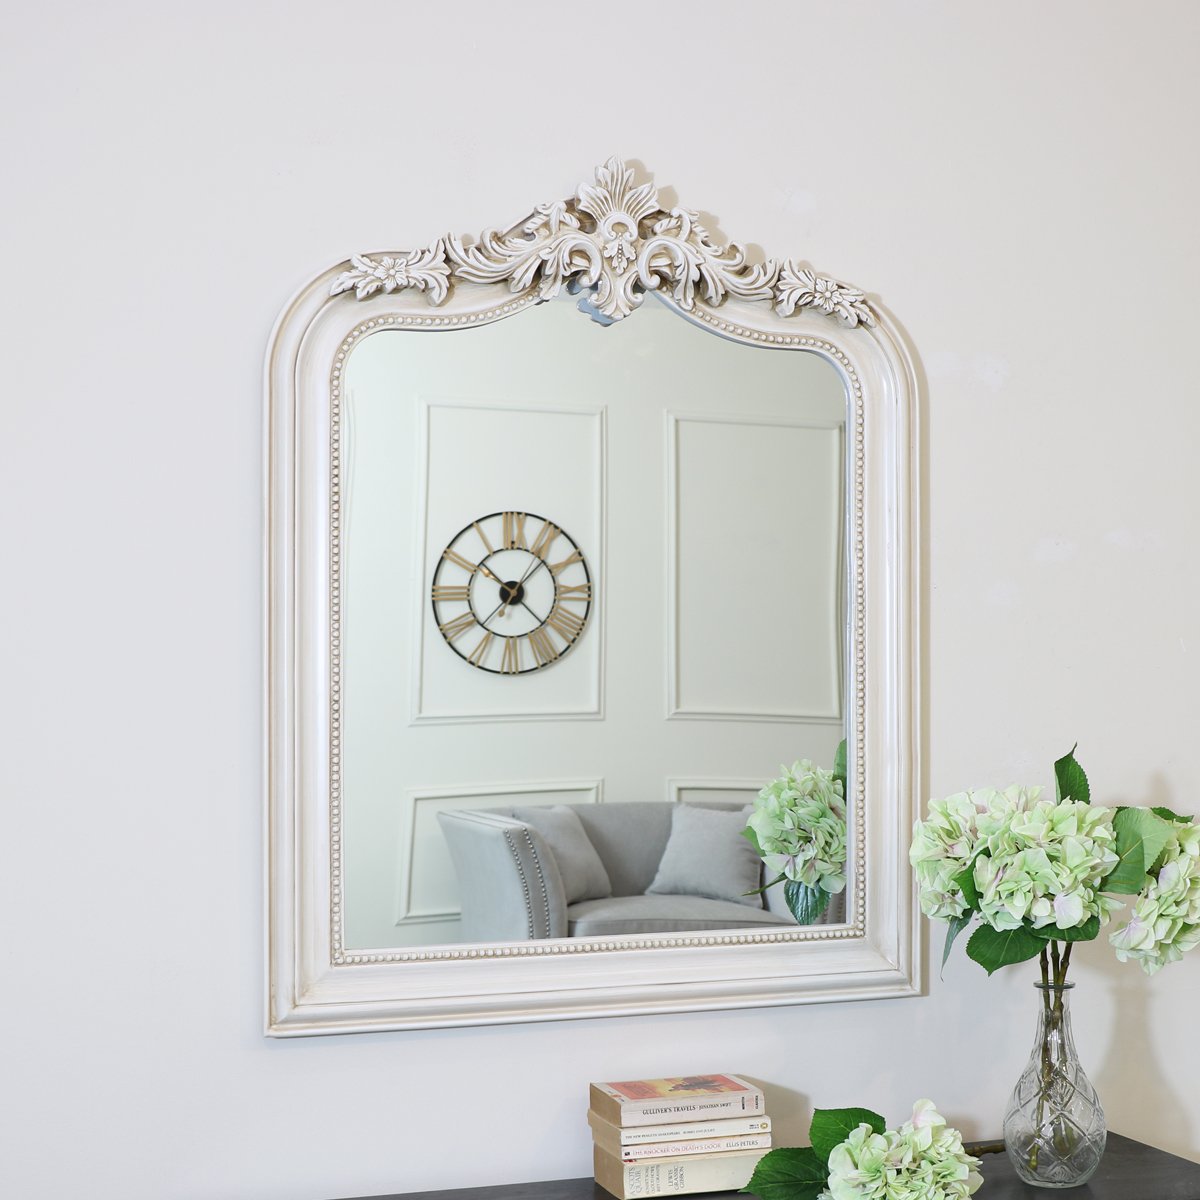 Ornate Arched Antiqued Ivory Wall Mirror 100 cm x 80cm 